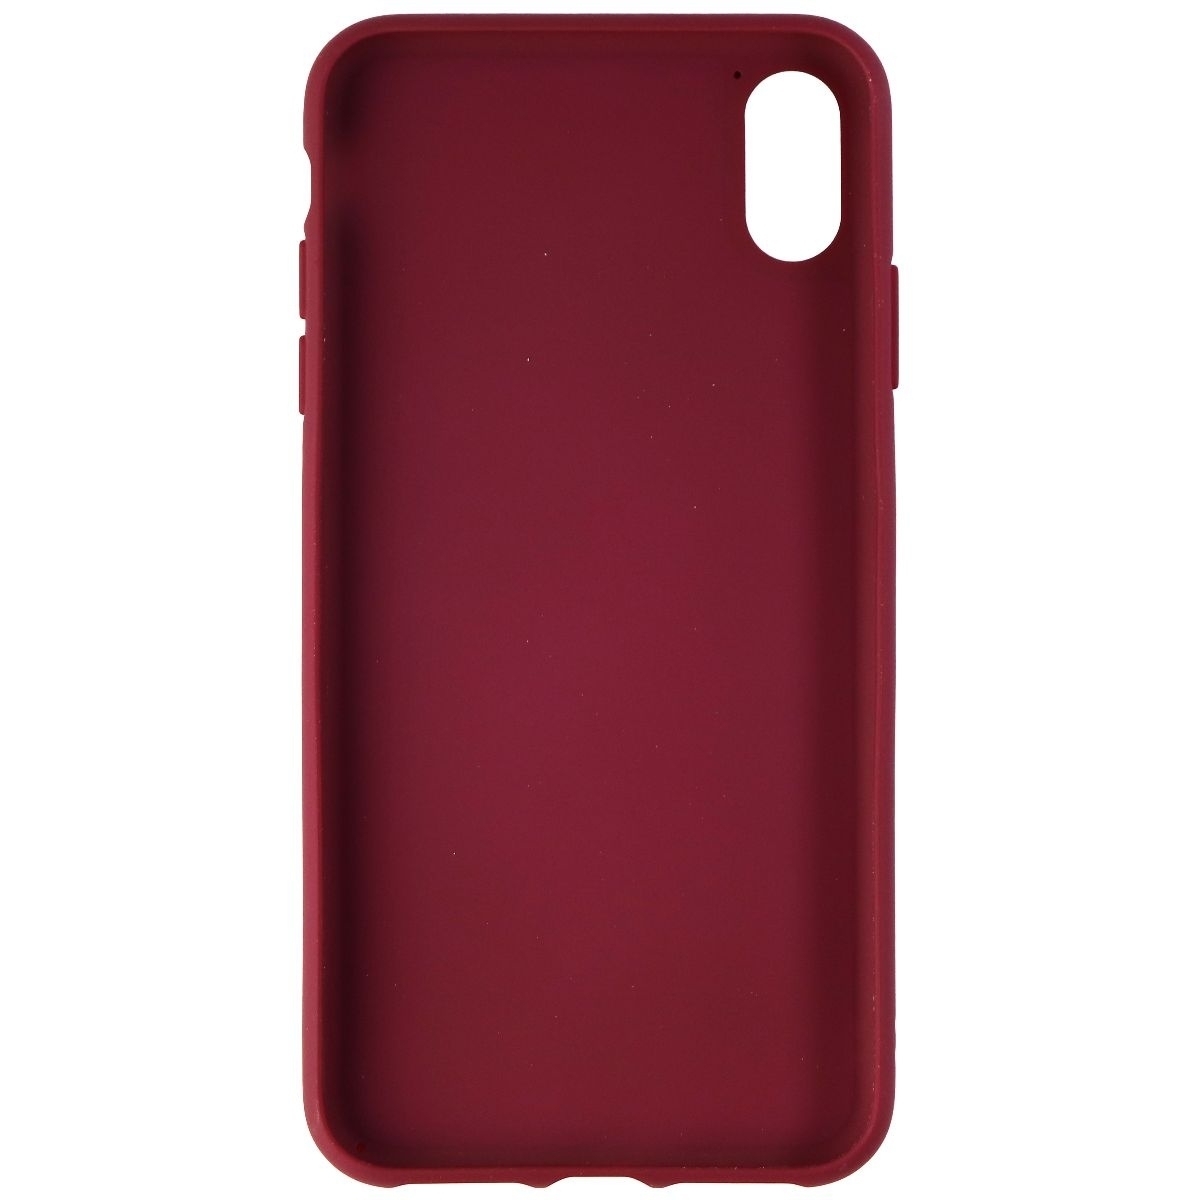 Adidas 3-Stripes Snap Case For Apple IPhone Xs Max - Burgundy